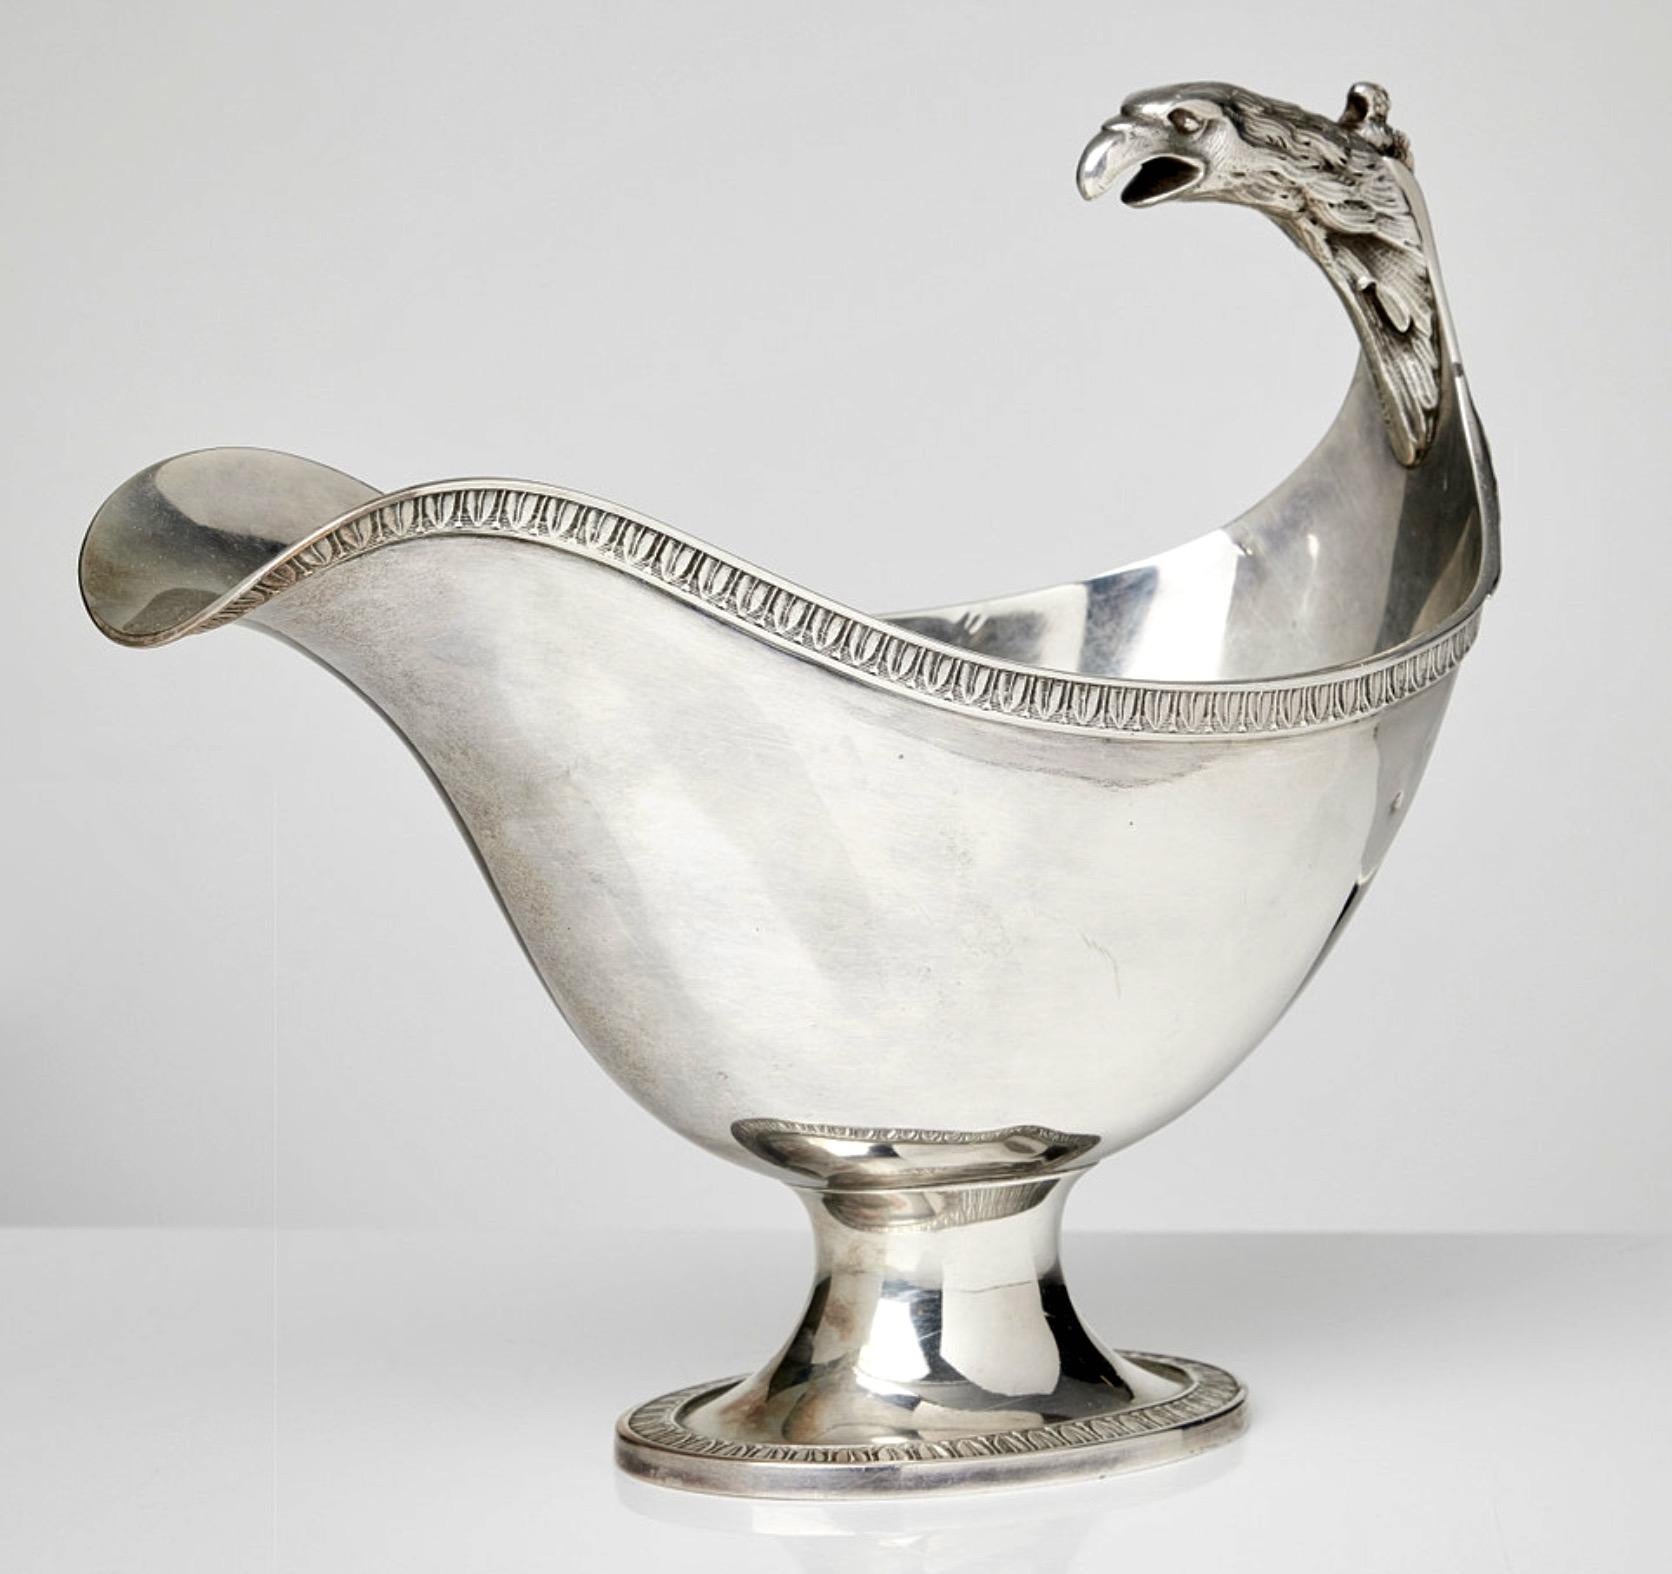 A nice 19th century silver sauce boat of empire model made in Paris. A well executed eagle head forming the handle. With makers stamp of  Paul Duhamel working 1832-1845 in Paris.
The eagle represent honesty, truth, majesty, strength, courage,